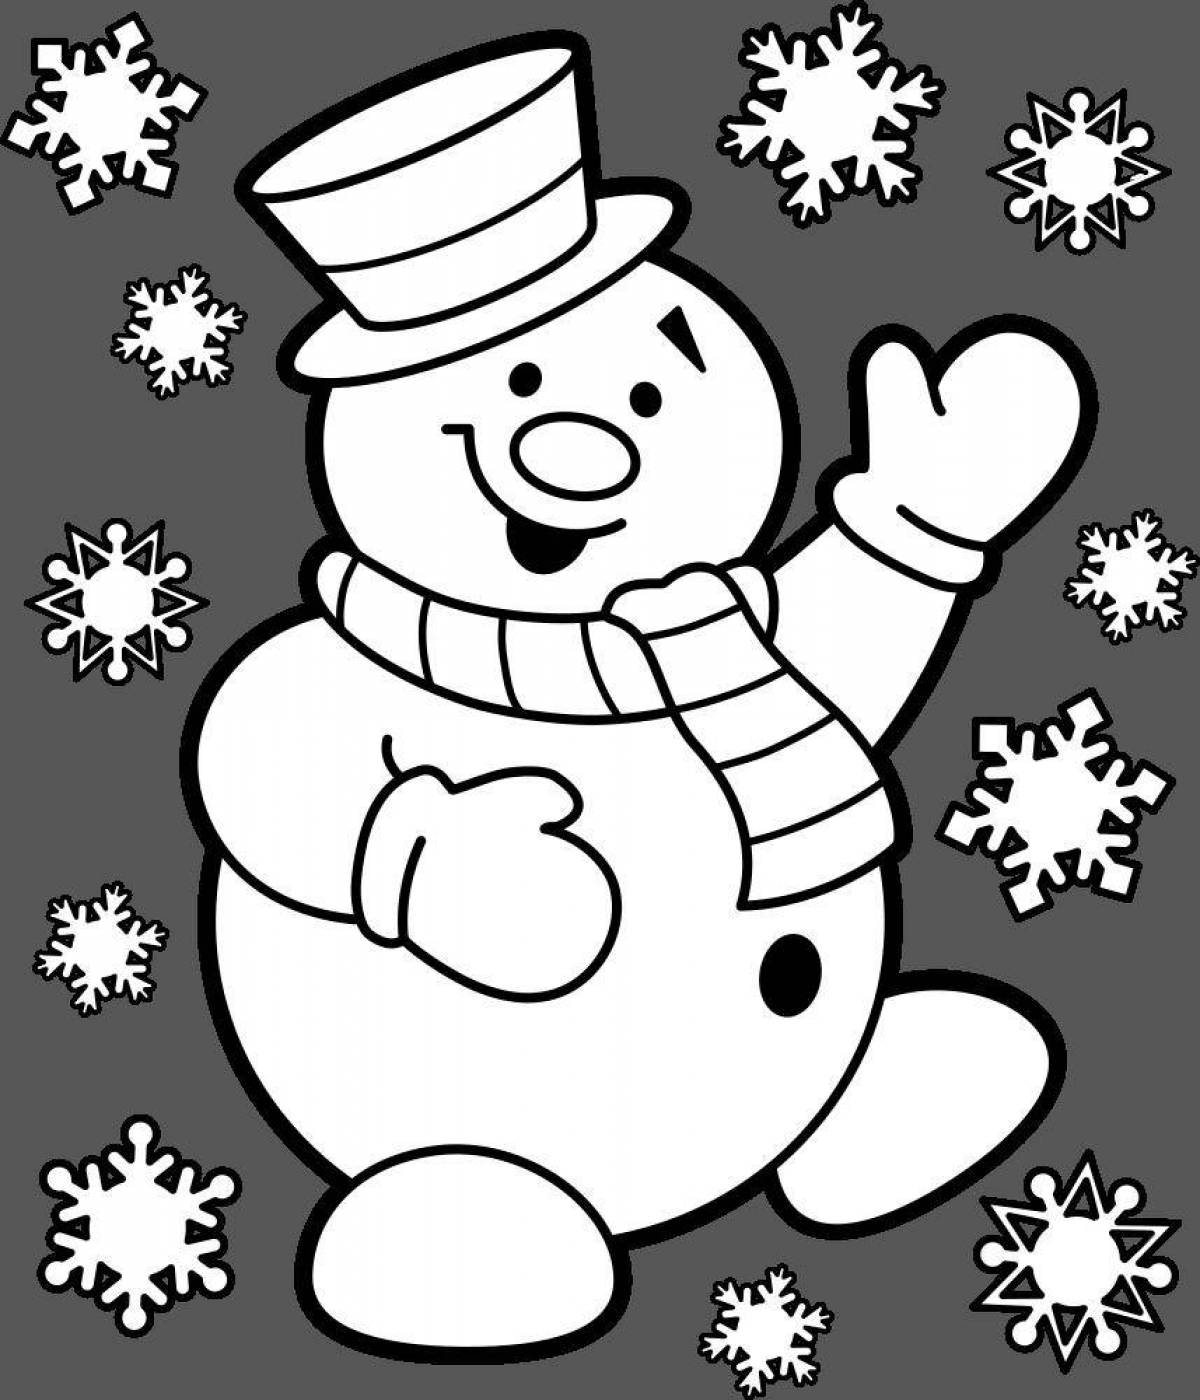 Crazy snowman coloring book for kids 3 4